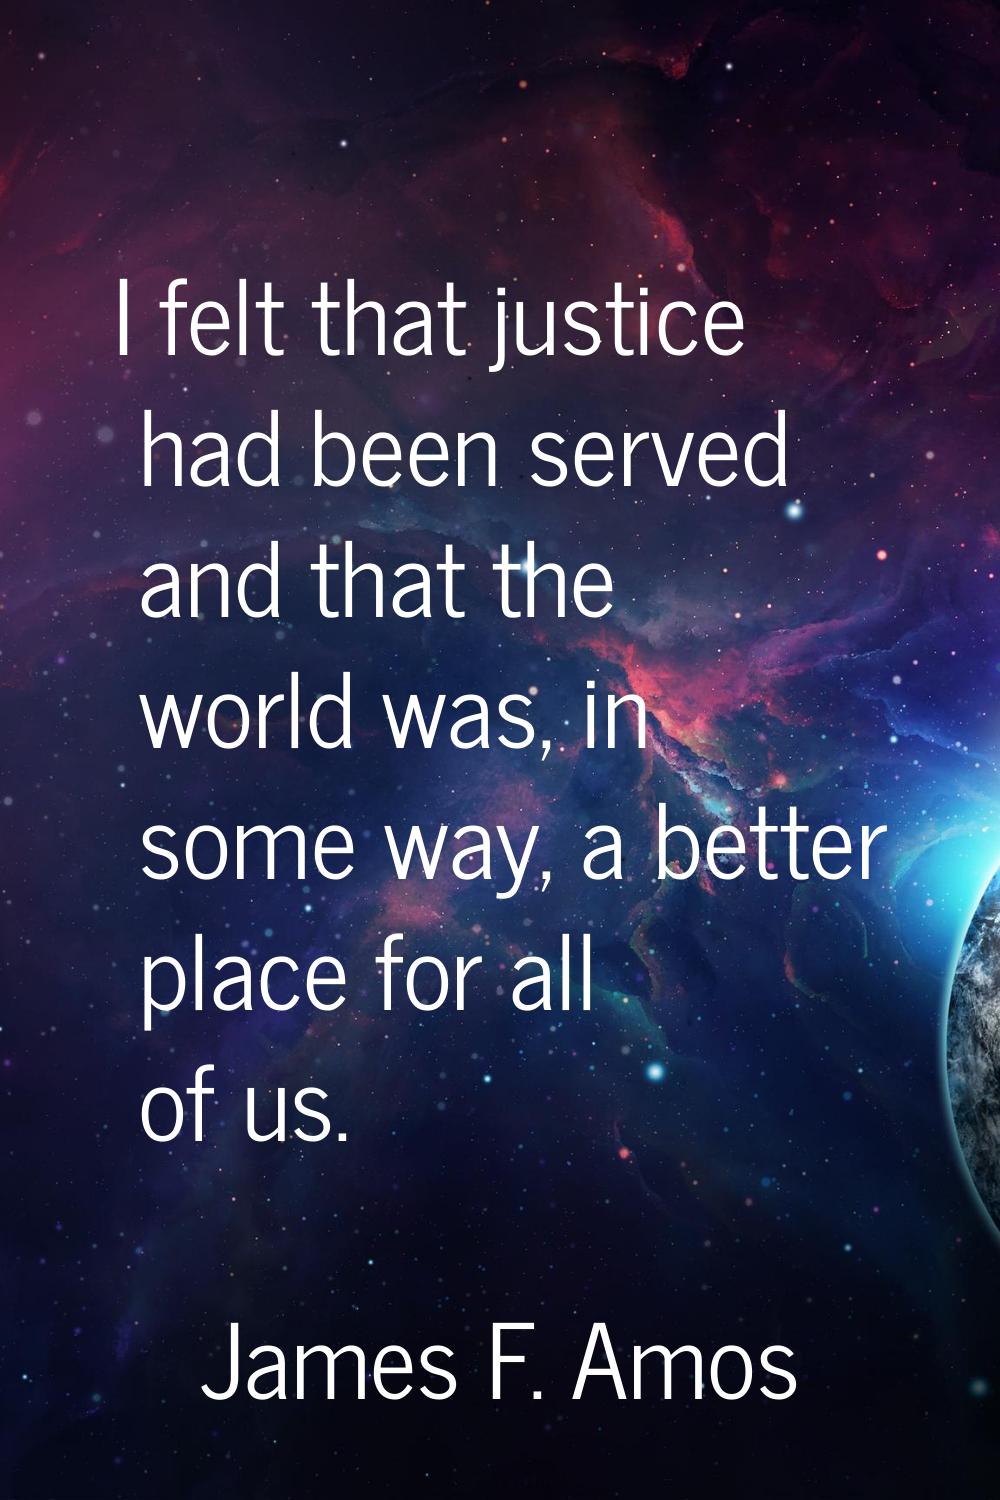 I felt that justice had been served and that the world was, in some way, a better place for all of 